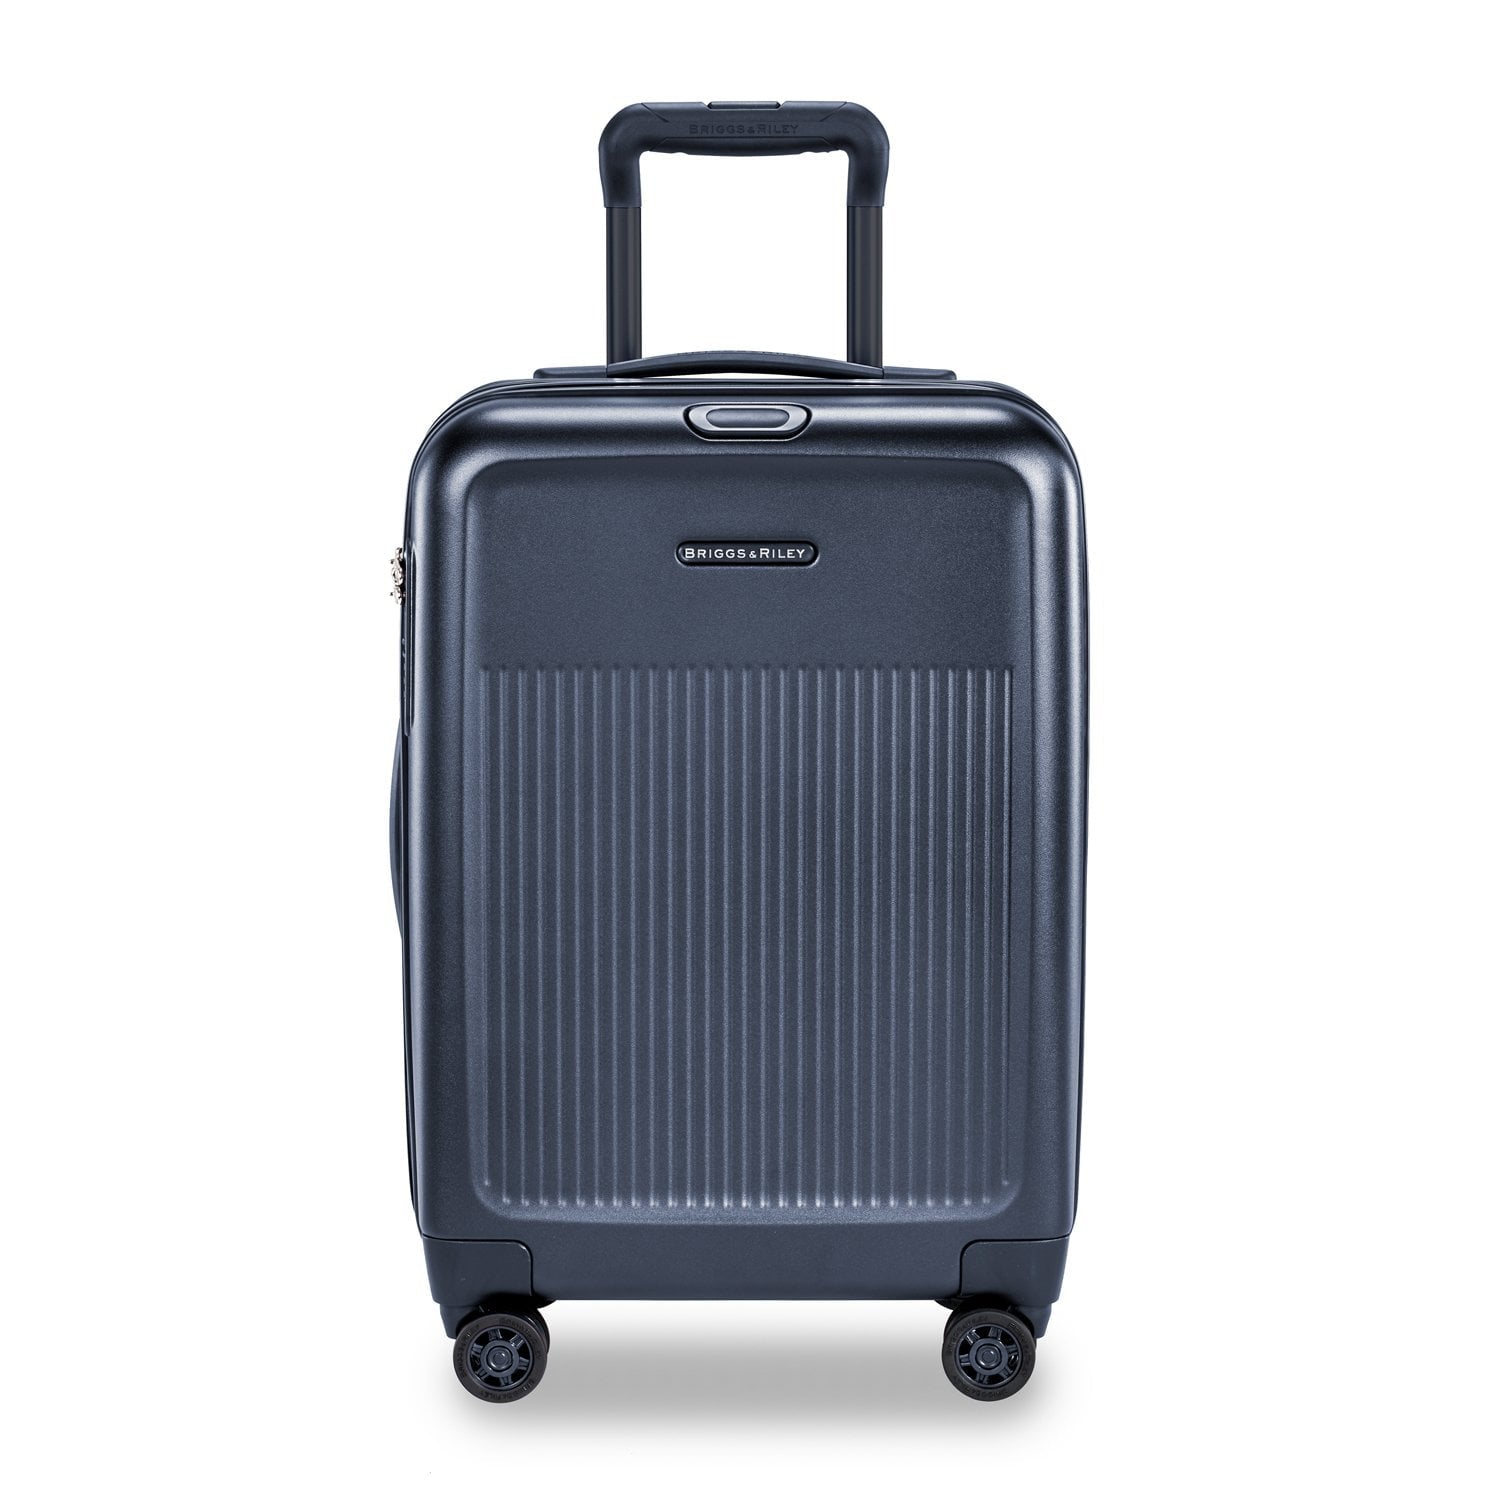 Briggs & Riley Sympatico International Carry-On Expandable Spinner Luggage - Navy